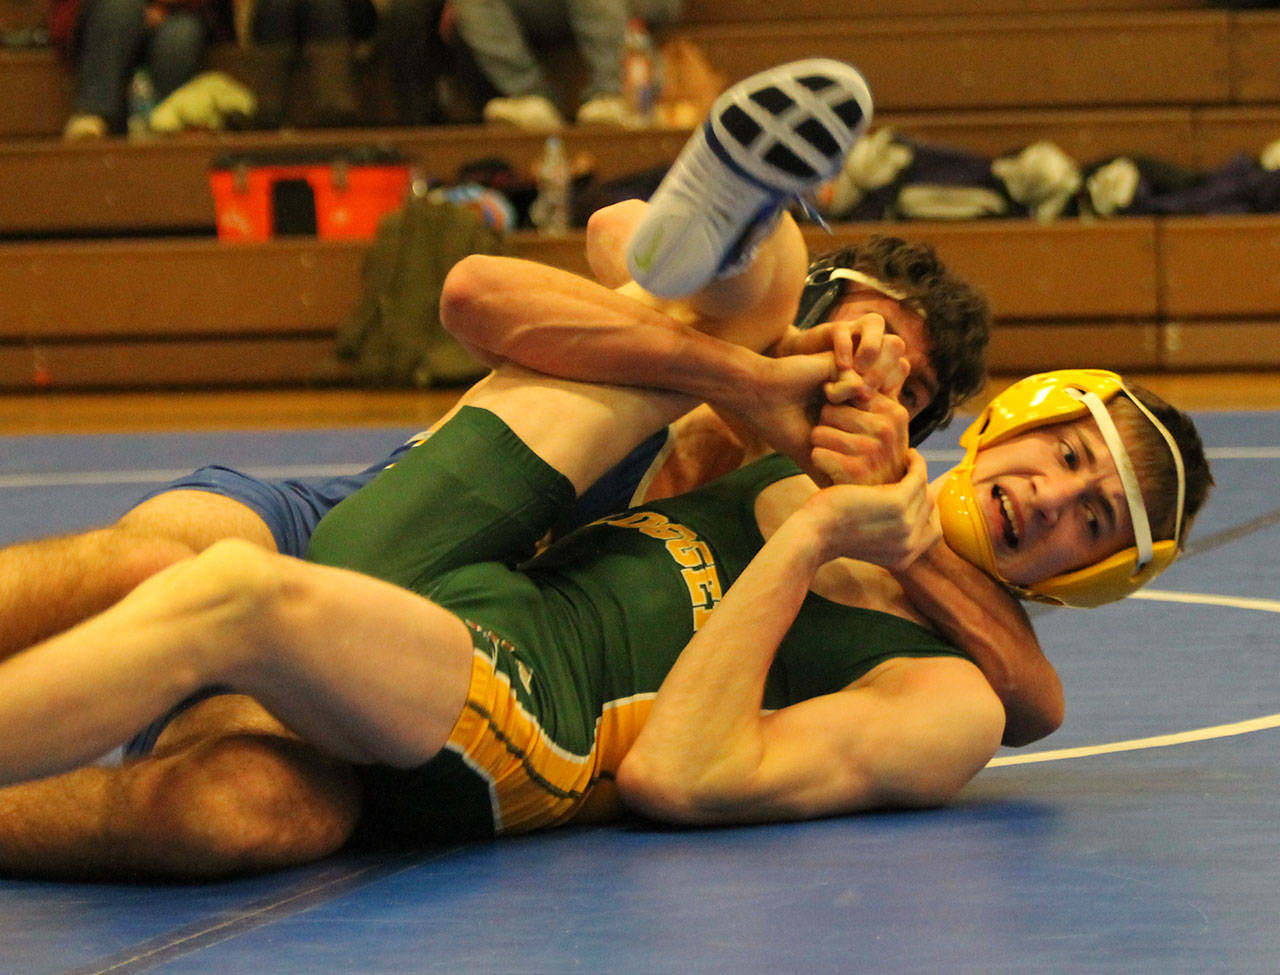 South Whidbey’s Drew Aposhyan, back, has his Darrington opponent in trouble. (Photo by Jim Waller/South Whidbey Record)